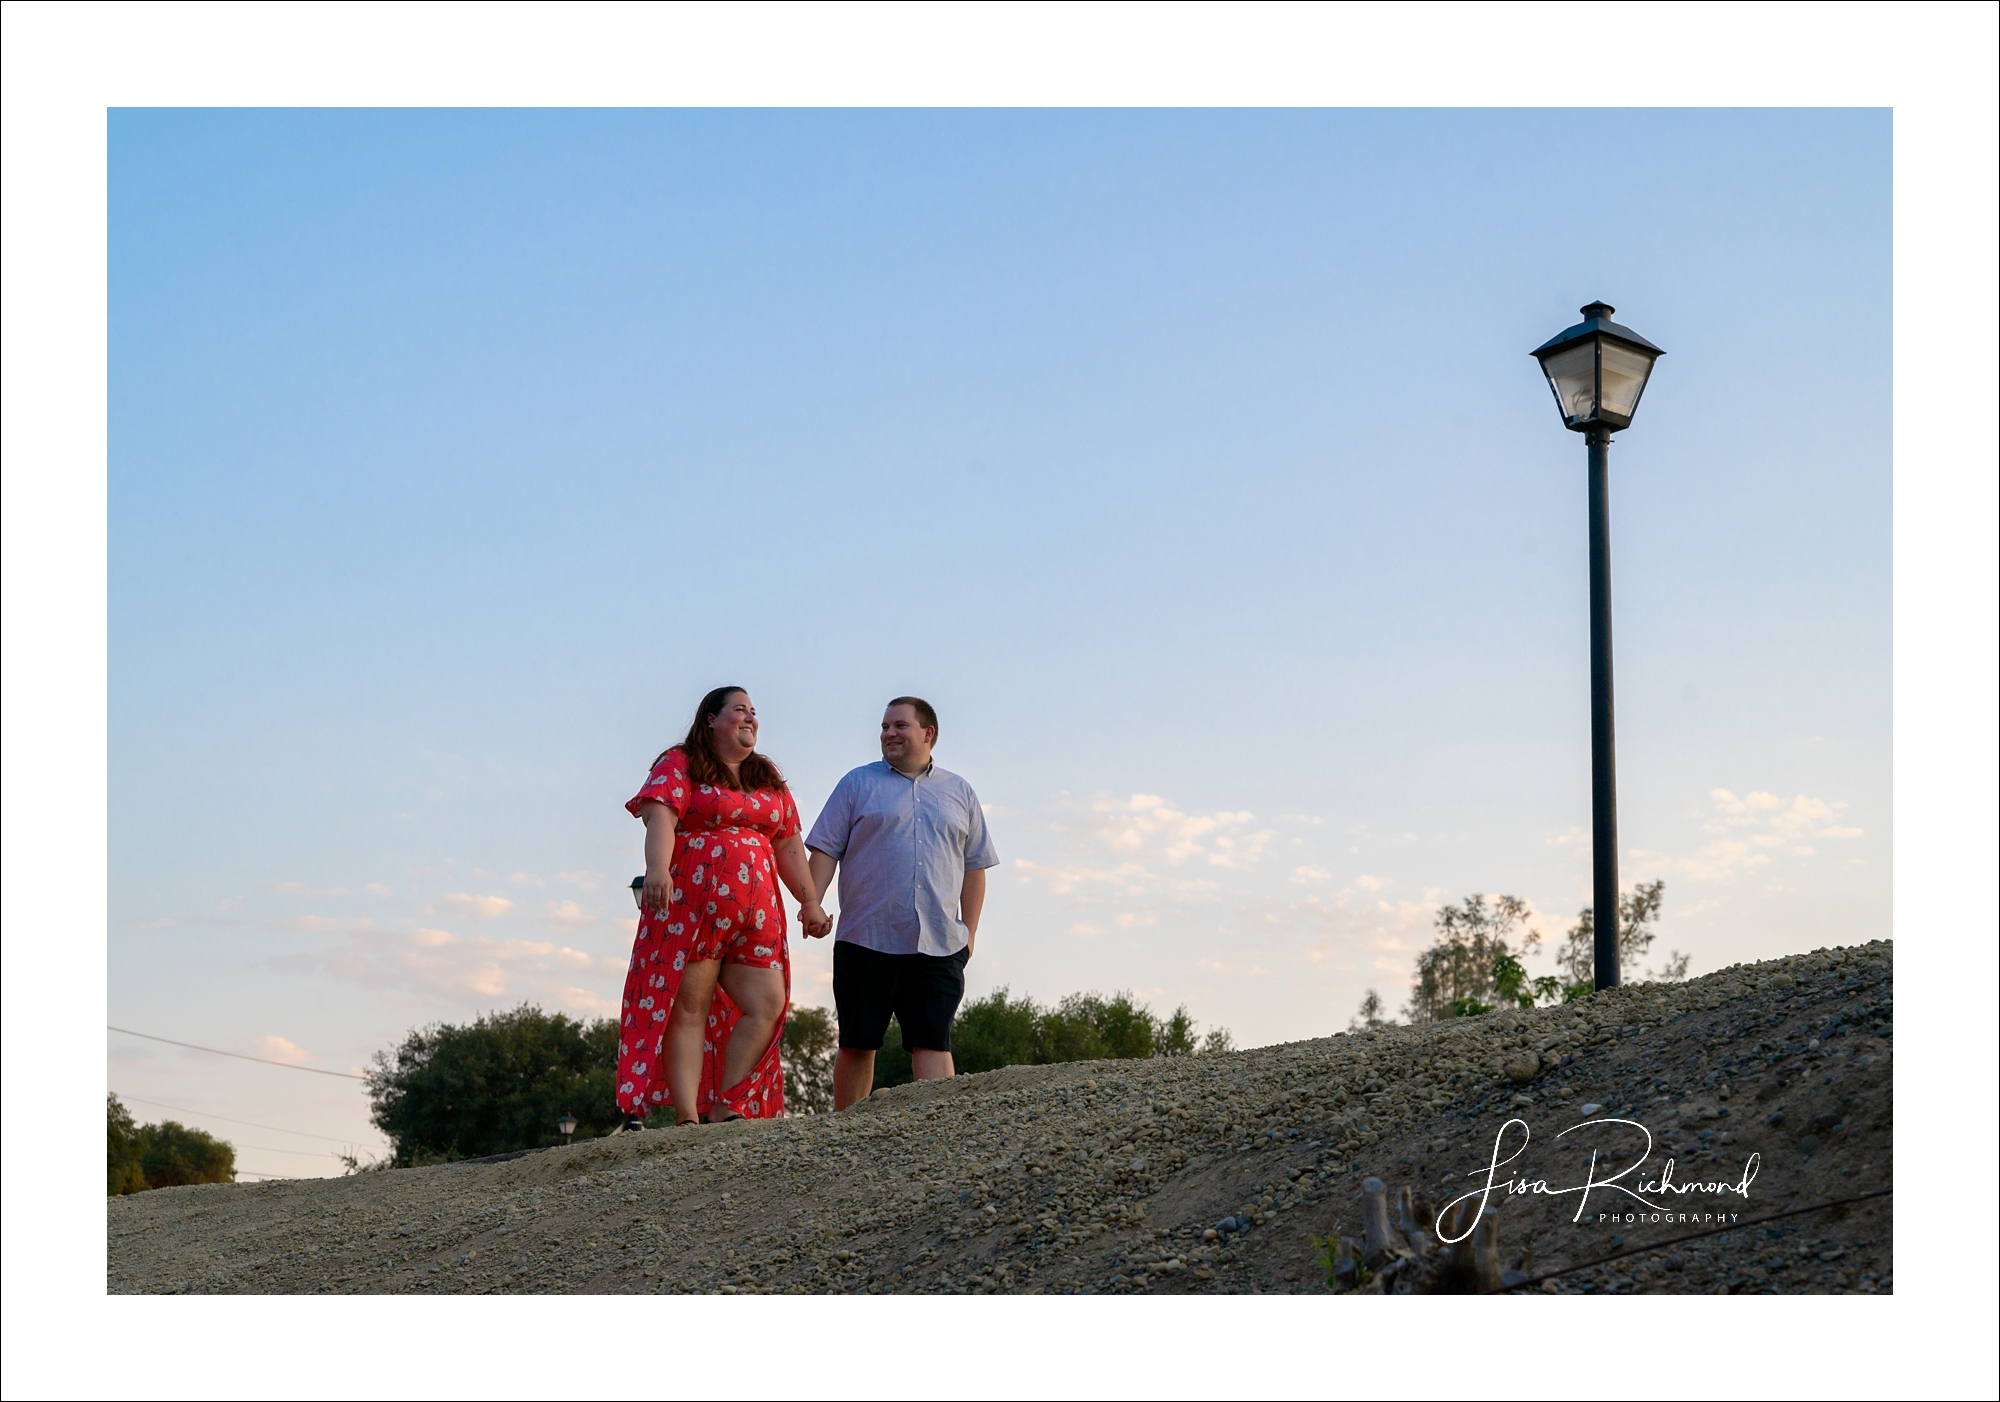 Cara and Justin &#8211; Marrying this September at Lakeside Beach in South Lake Tahoe.